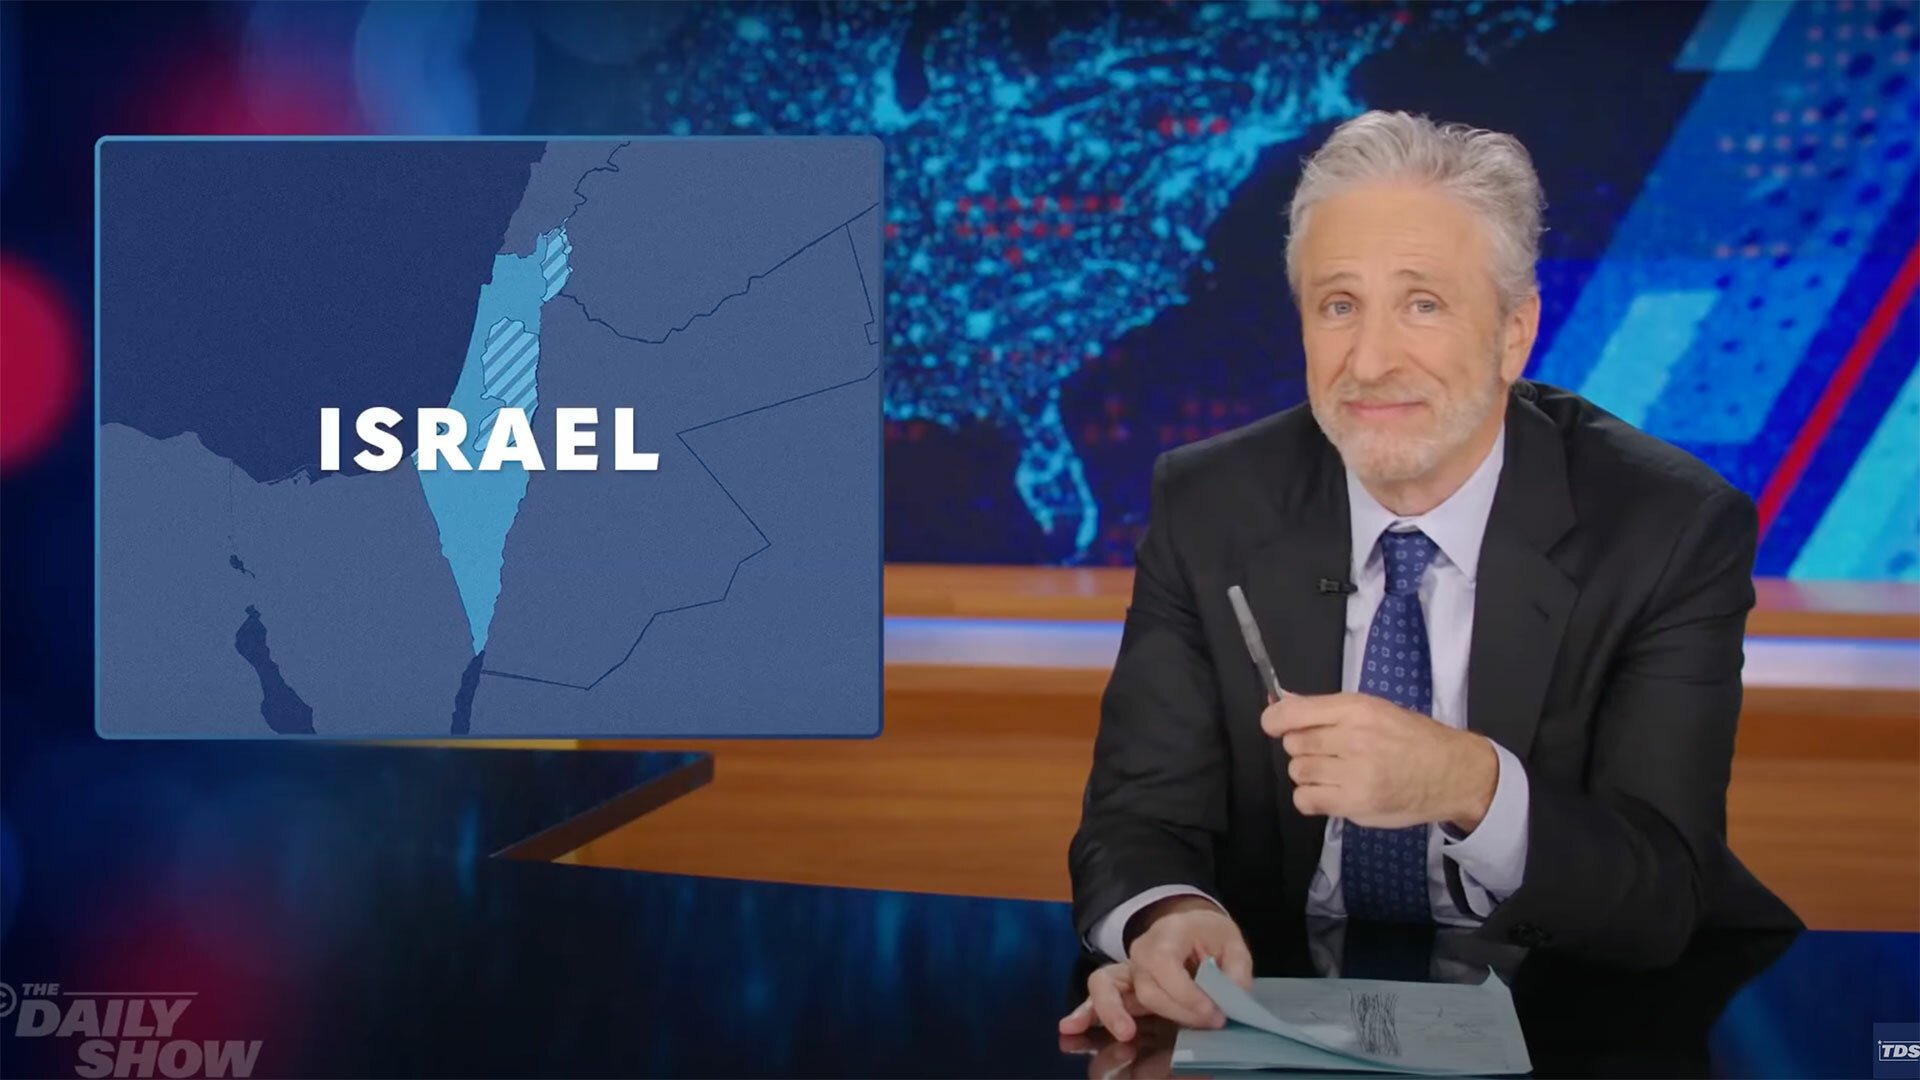 A man sits at a talk show desk while Israel is shown on a map in the top-left corner.